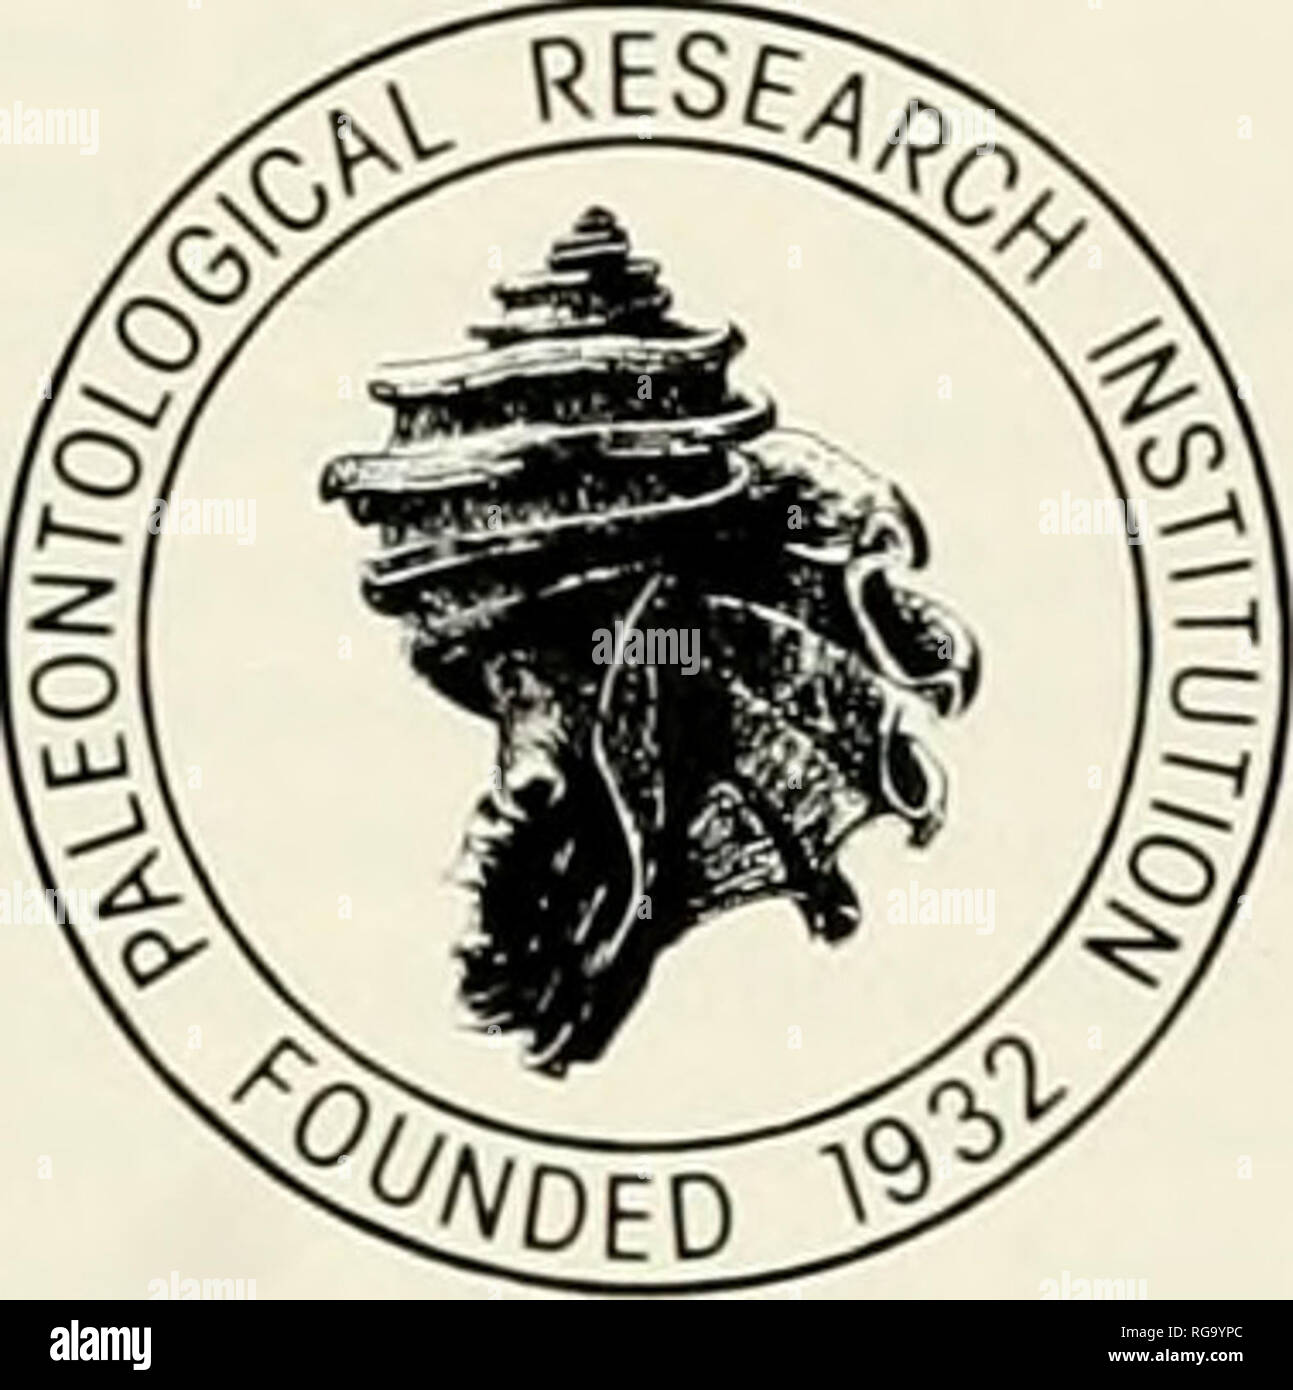 . Bulletins of American paleontology. . The Paleontological Research Institution acknowledges with special thanks the contributions of the following individuals and institutions PATRONS fSIOUO or more at the discretion of the contributor) Armand L. Adams (1976) James A. Allen (1967) American Oil Company (1976) Atlantic Richfield Company (1978) Miss Ethel Z. Bailey (1970) Christina L. Balk (1970) Mr. &amp; Mrs. Kenneth E. Caster (1967) Chevron Oil Company (1978) Exxon Company (1977 to date) Lois S. Fogelsanger (1966) Gulf Oil Corporation (1978) Merrill W. Haas (1975) Miss Rebecca S. Harris (196 Stock Photo